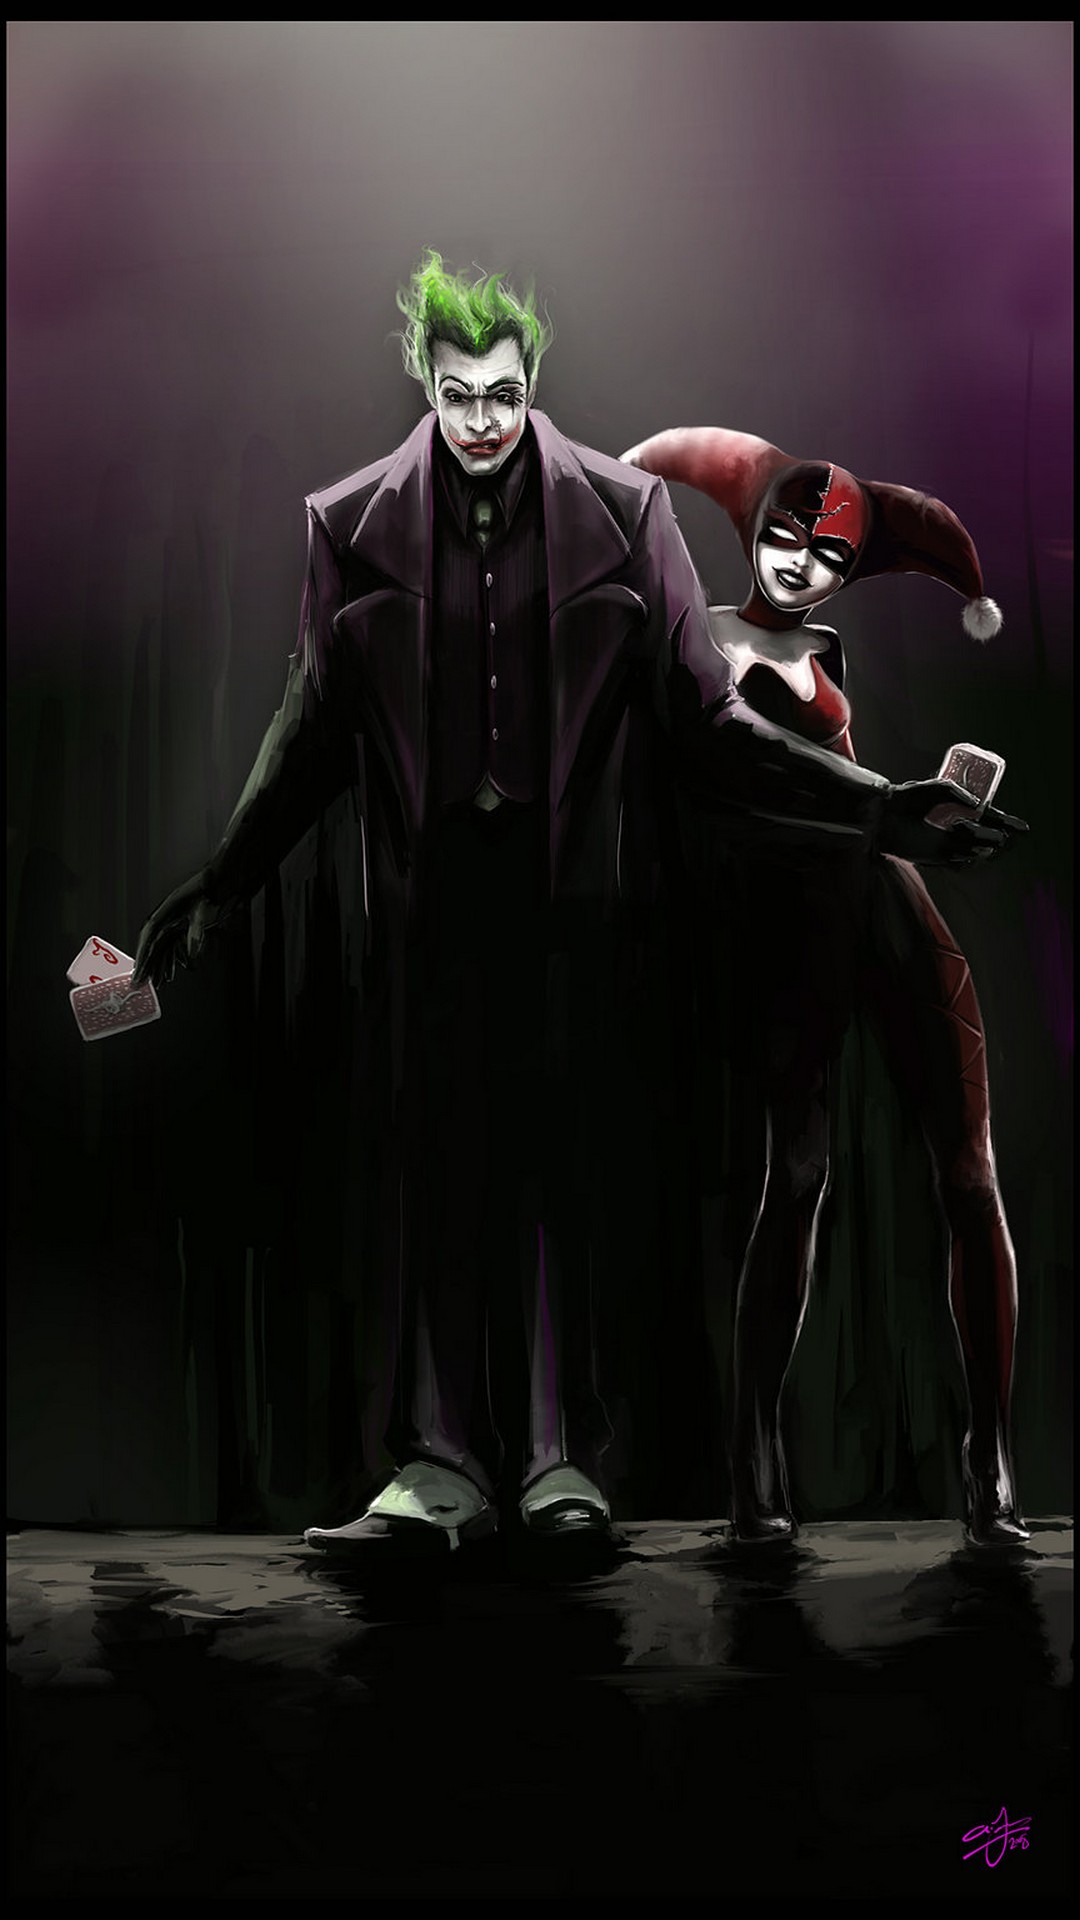 Wallpaper Joker And Harley iPhone with image resolution 1080x1920 pixel. You can make this wallpaper for your iPhone 5, 6, 7, 8, X backgrounds, Mobile Screensaver, or iPad Lock Screen